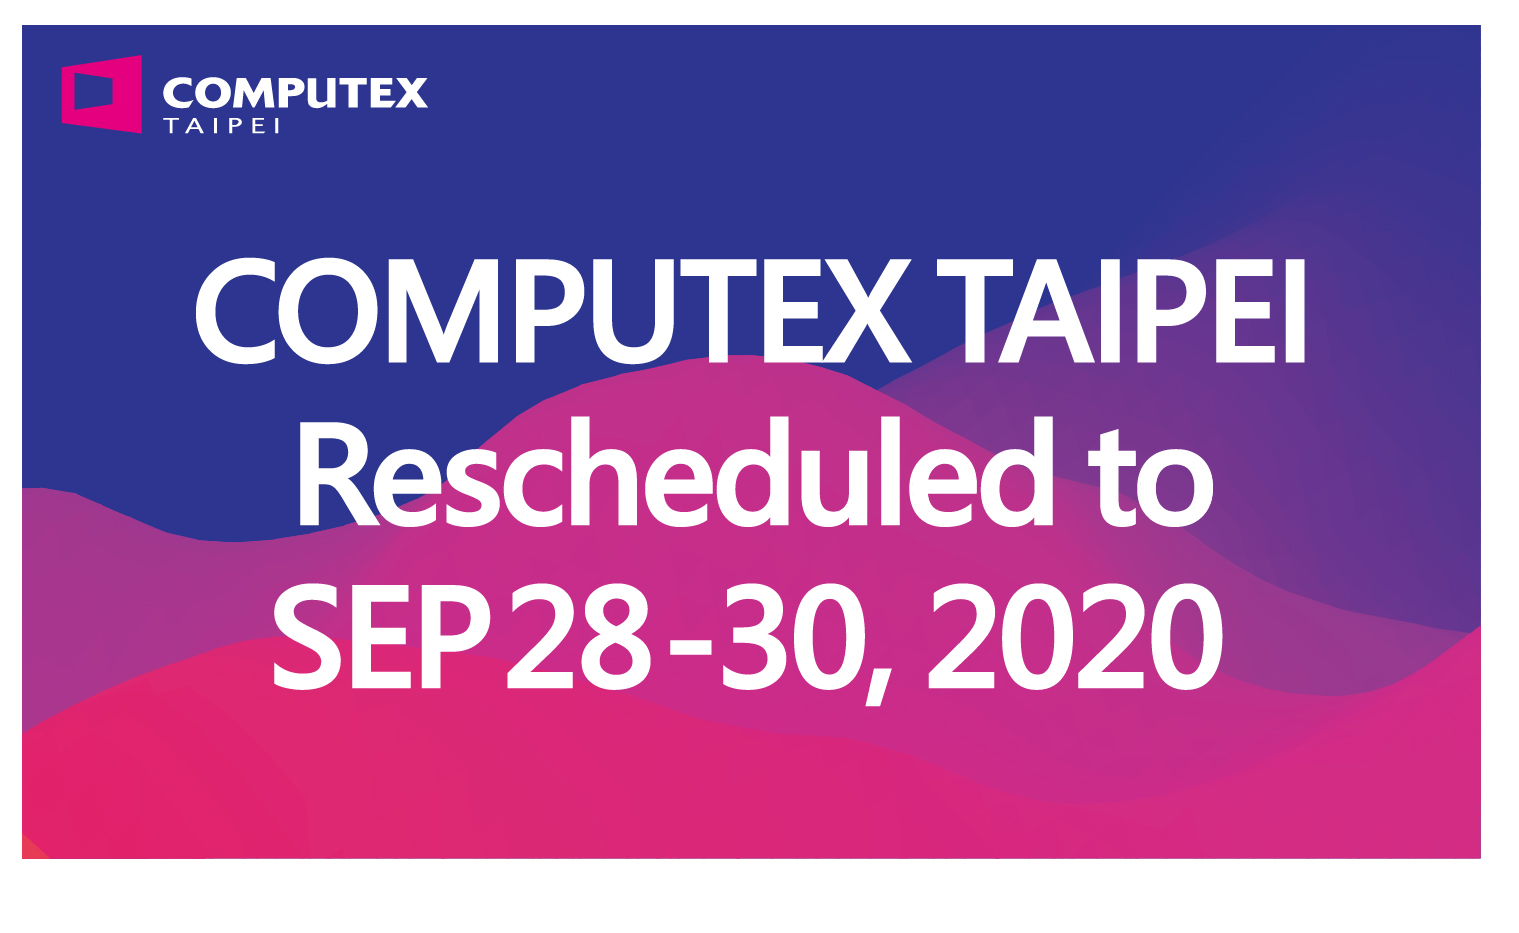 Computex 2020 is cancelled due to coronavirus